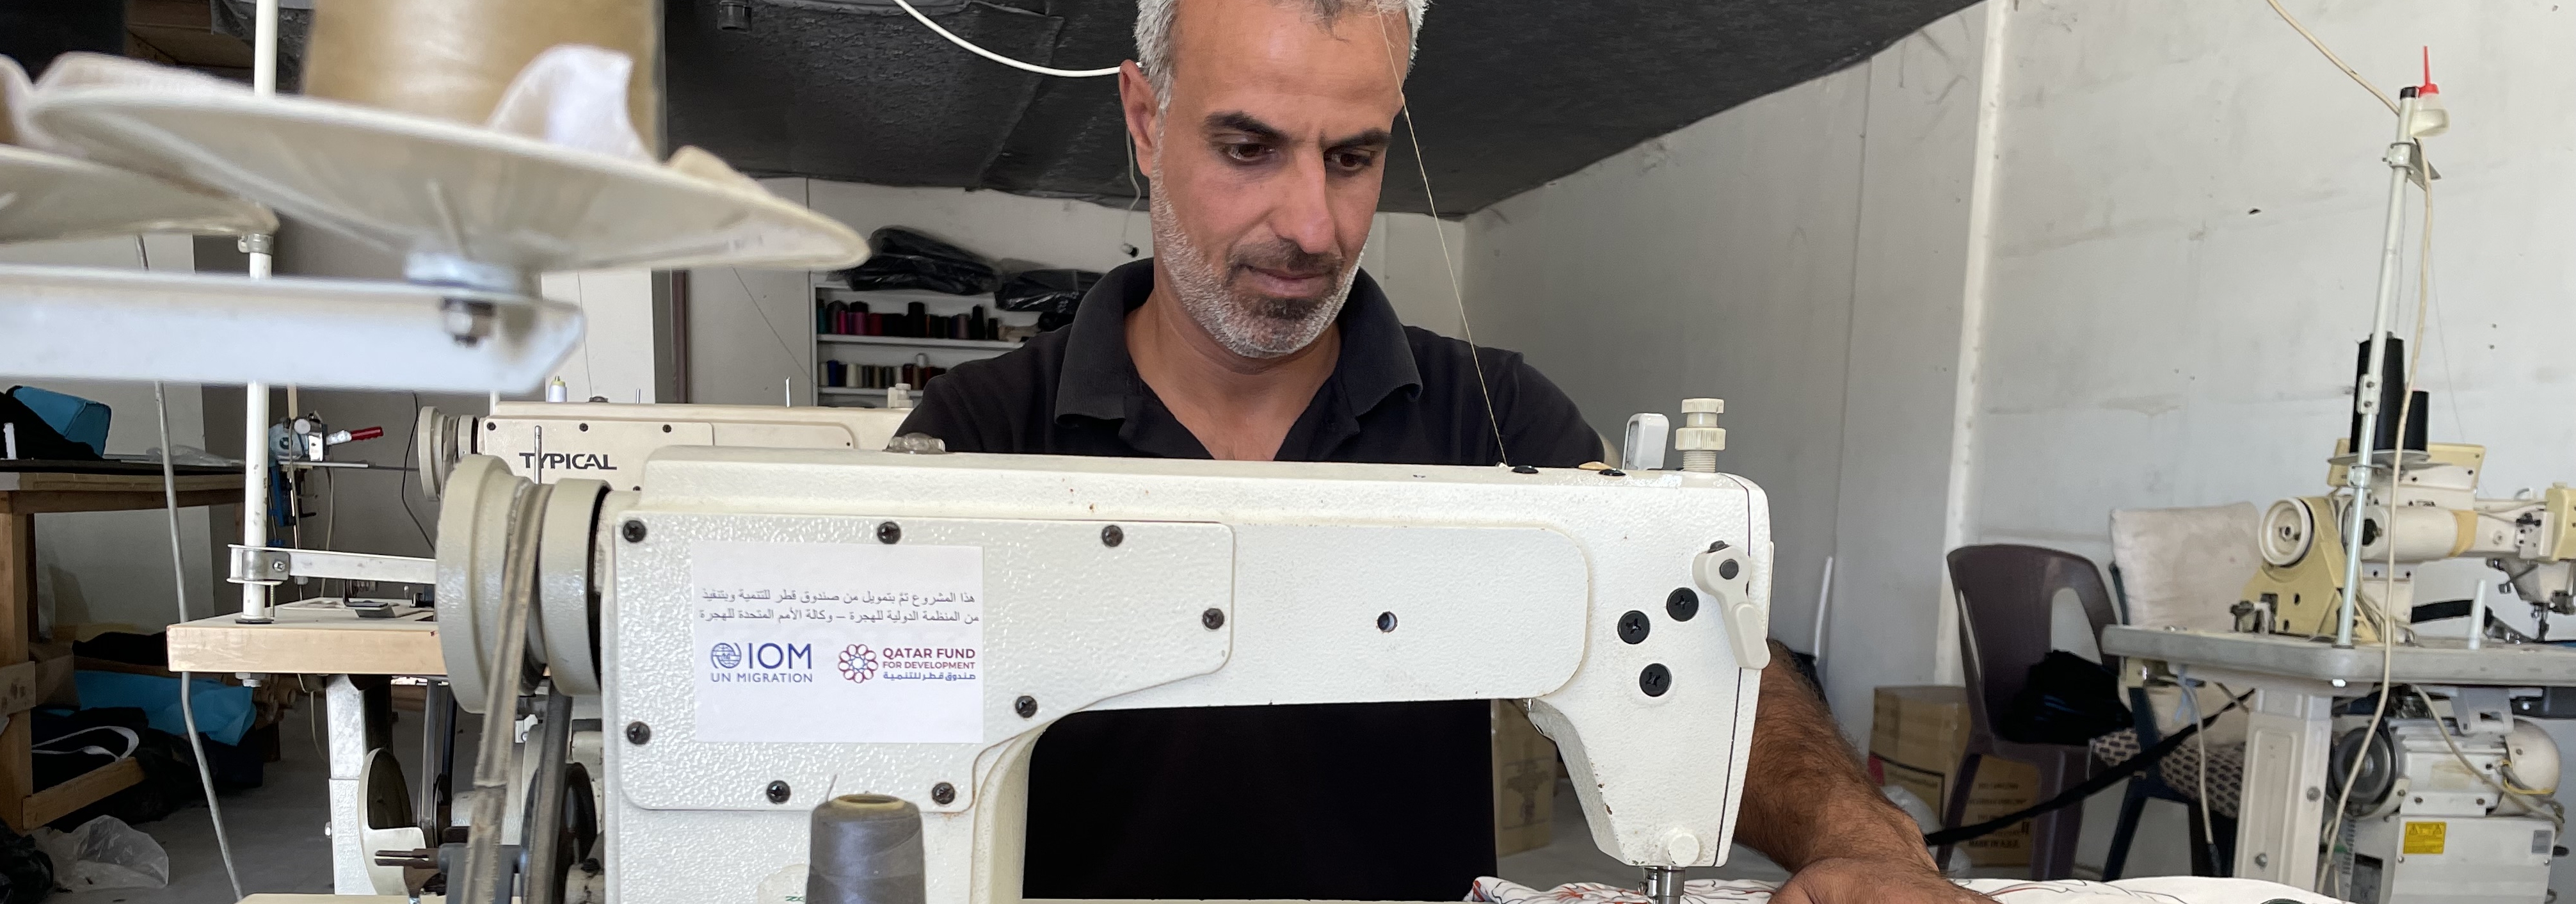 A beneficiary of the Individual Livelihood Assistance in Bekaa, using his newly purchased sewing machine through the grant provided by IOM to start up his small business. @ IOM Lebanon 2022.